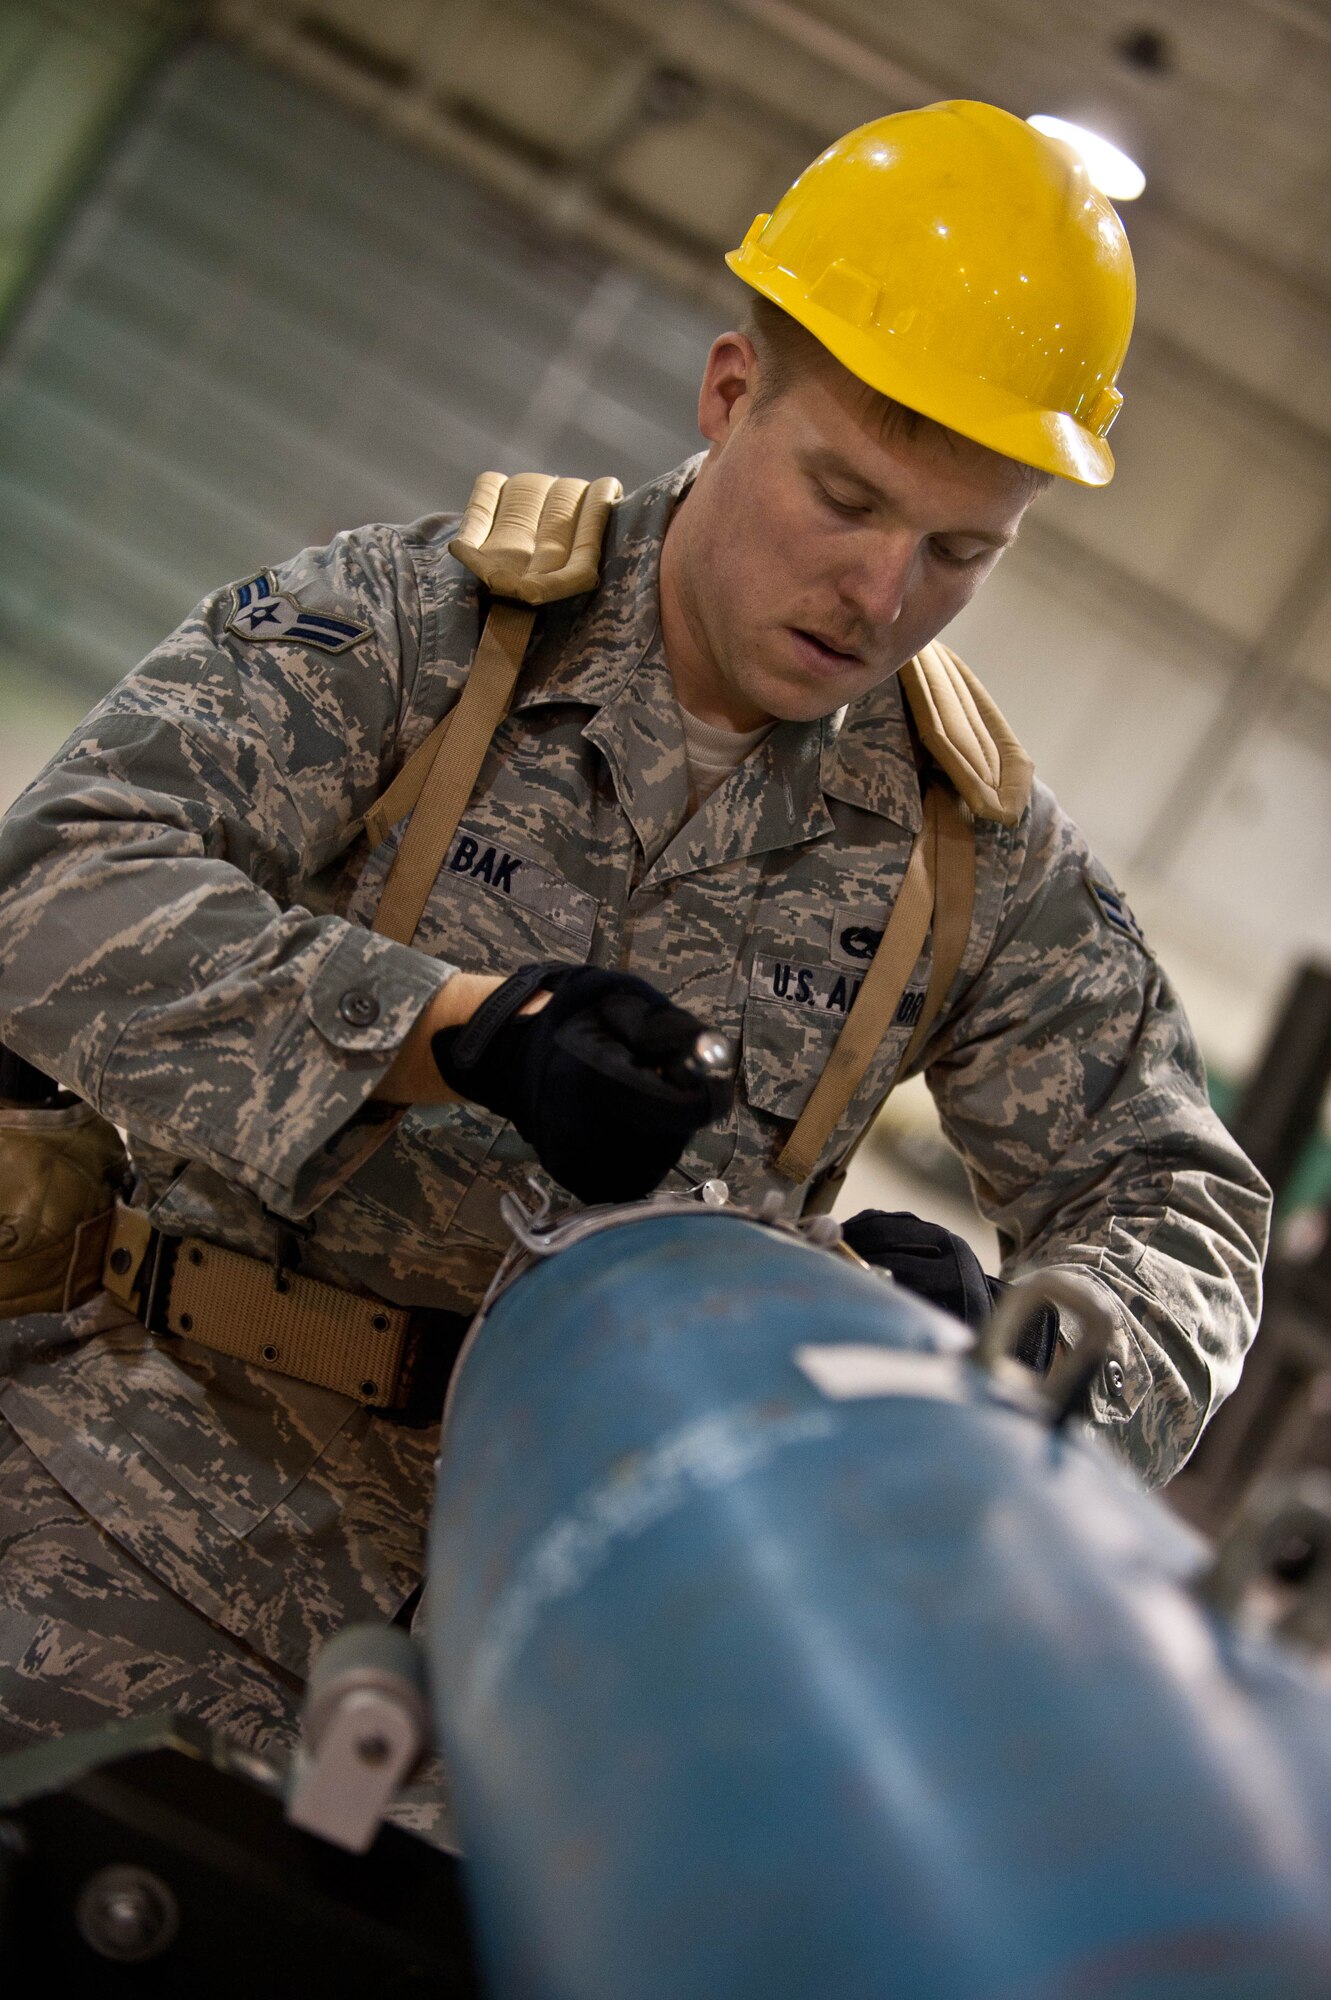 Airman 1st Class Joseph Bak, 28th Munitions Squadron conventional maintenance crew member, assembles an inert guided bomb unit during an Operational Readiness Exercise at Ellsworth Air Force Base, S.D., March 19, 2013. The 28th MUNS Airmen are responsible for 1,707 munitions line items, 86 facilities and a 647–acre munitions storage area to support B-1 bomber operations. (U.S. Air Force photo by Airman 1st Class Zachary Hada/Released)